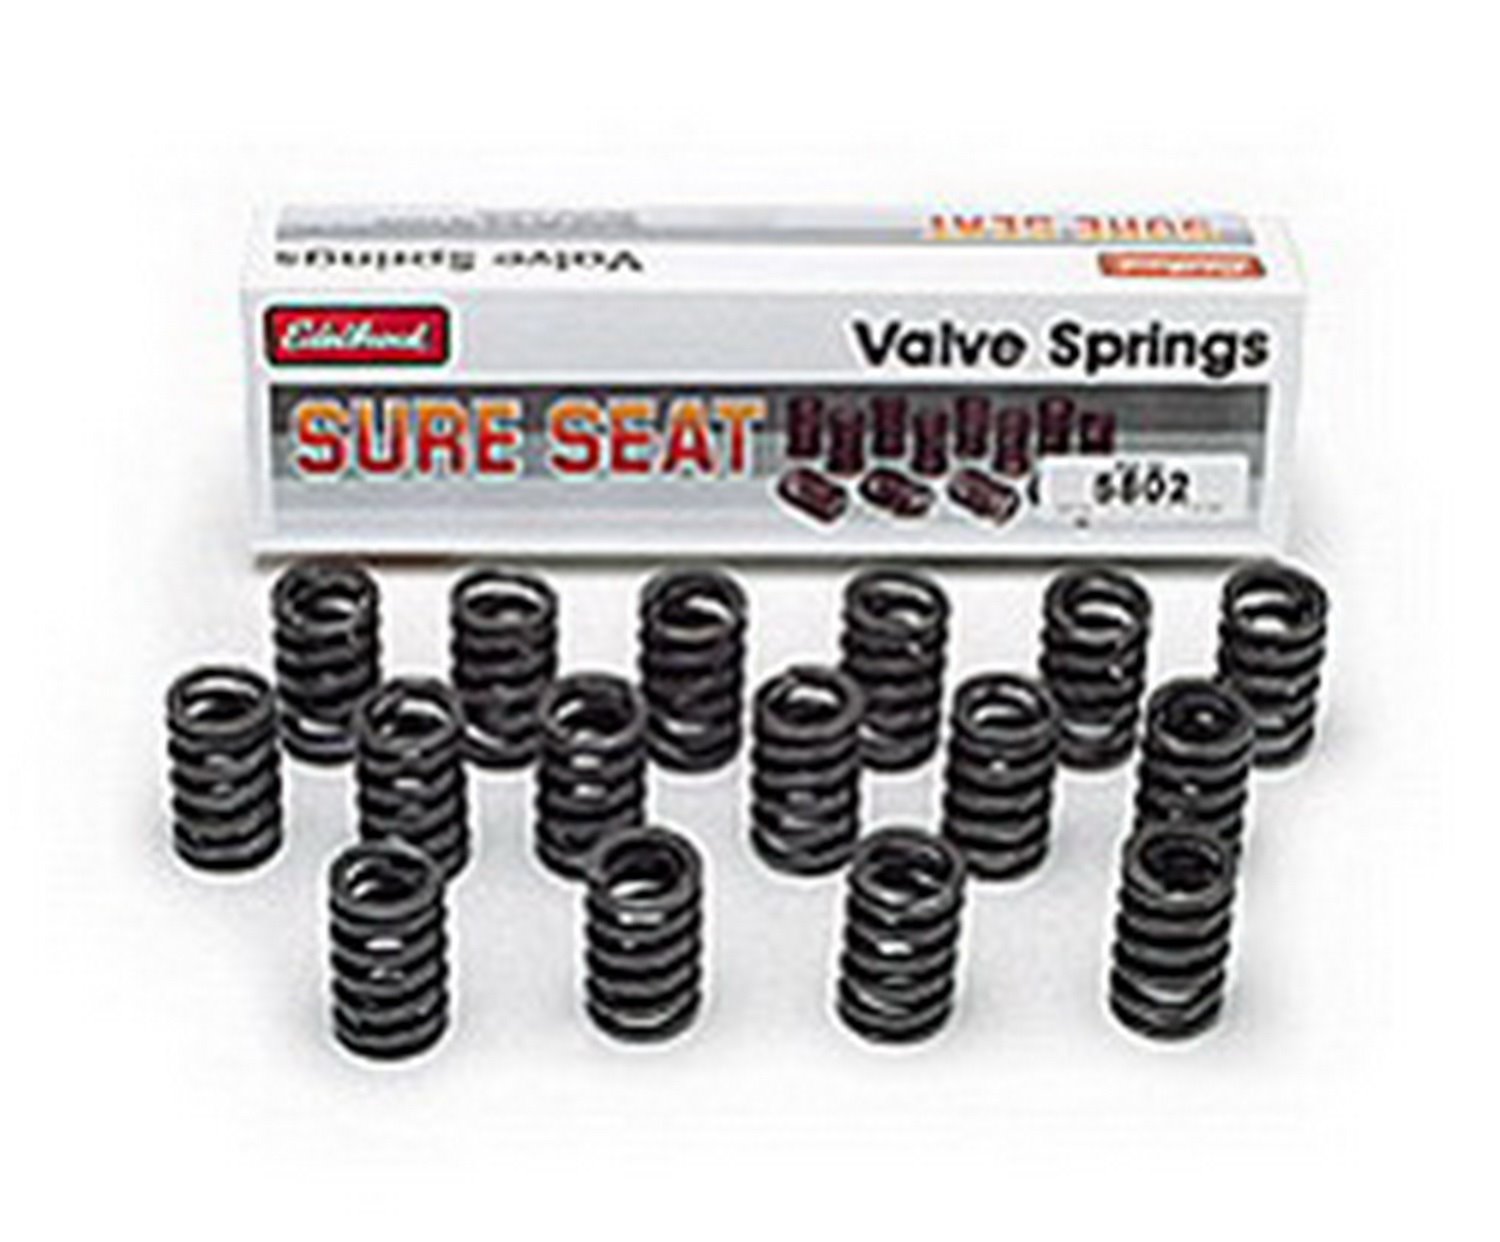 Sure Seat Valve Springs for Chevy 200-229-262 90° V6 OE Cast Iron Head